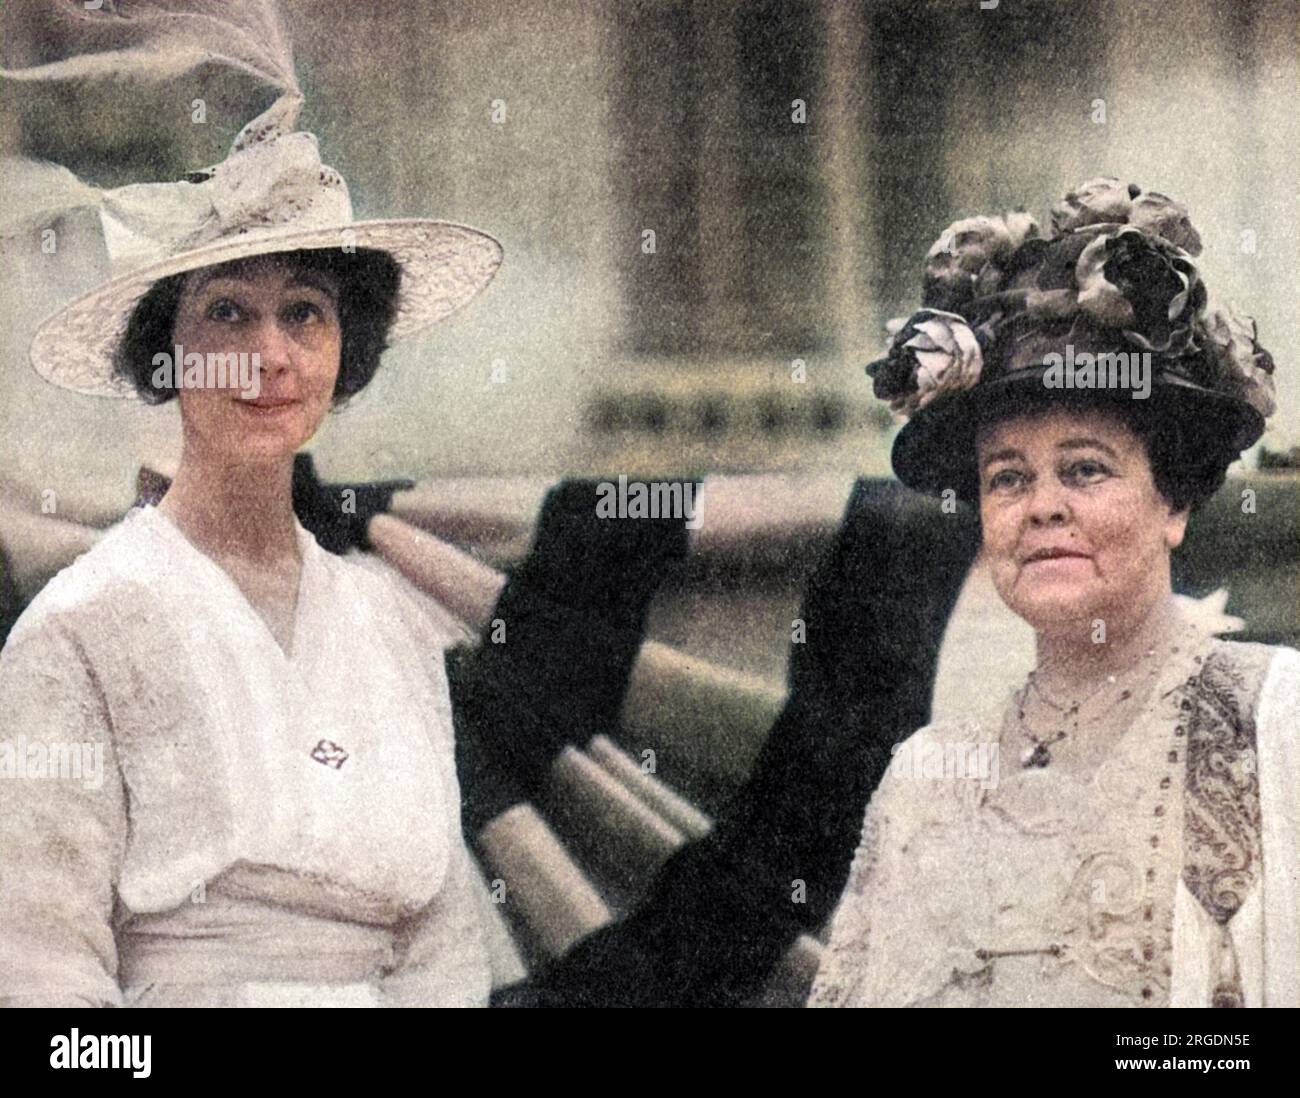 Consuelo, Duchess of Marlborough, formerly Consuelo Vanderbilt (1877 - 1964), American heiress and first wife of Charles Spencer-Churchill, 9th Duke of Marlborough pictured with Mrs O. H. P. Belmont, campaigner for women's suffrage in American, with whom the Duchess was staying at Marble House, Newport. Stock Photo